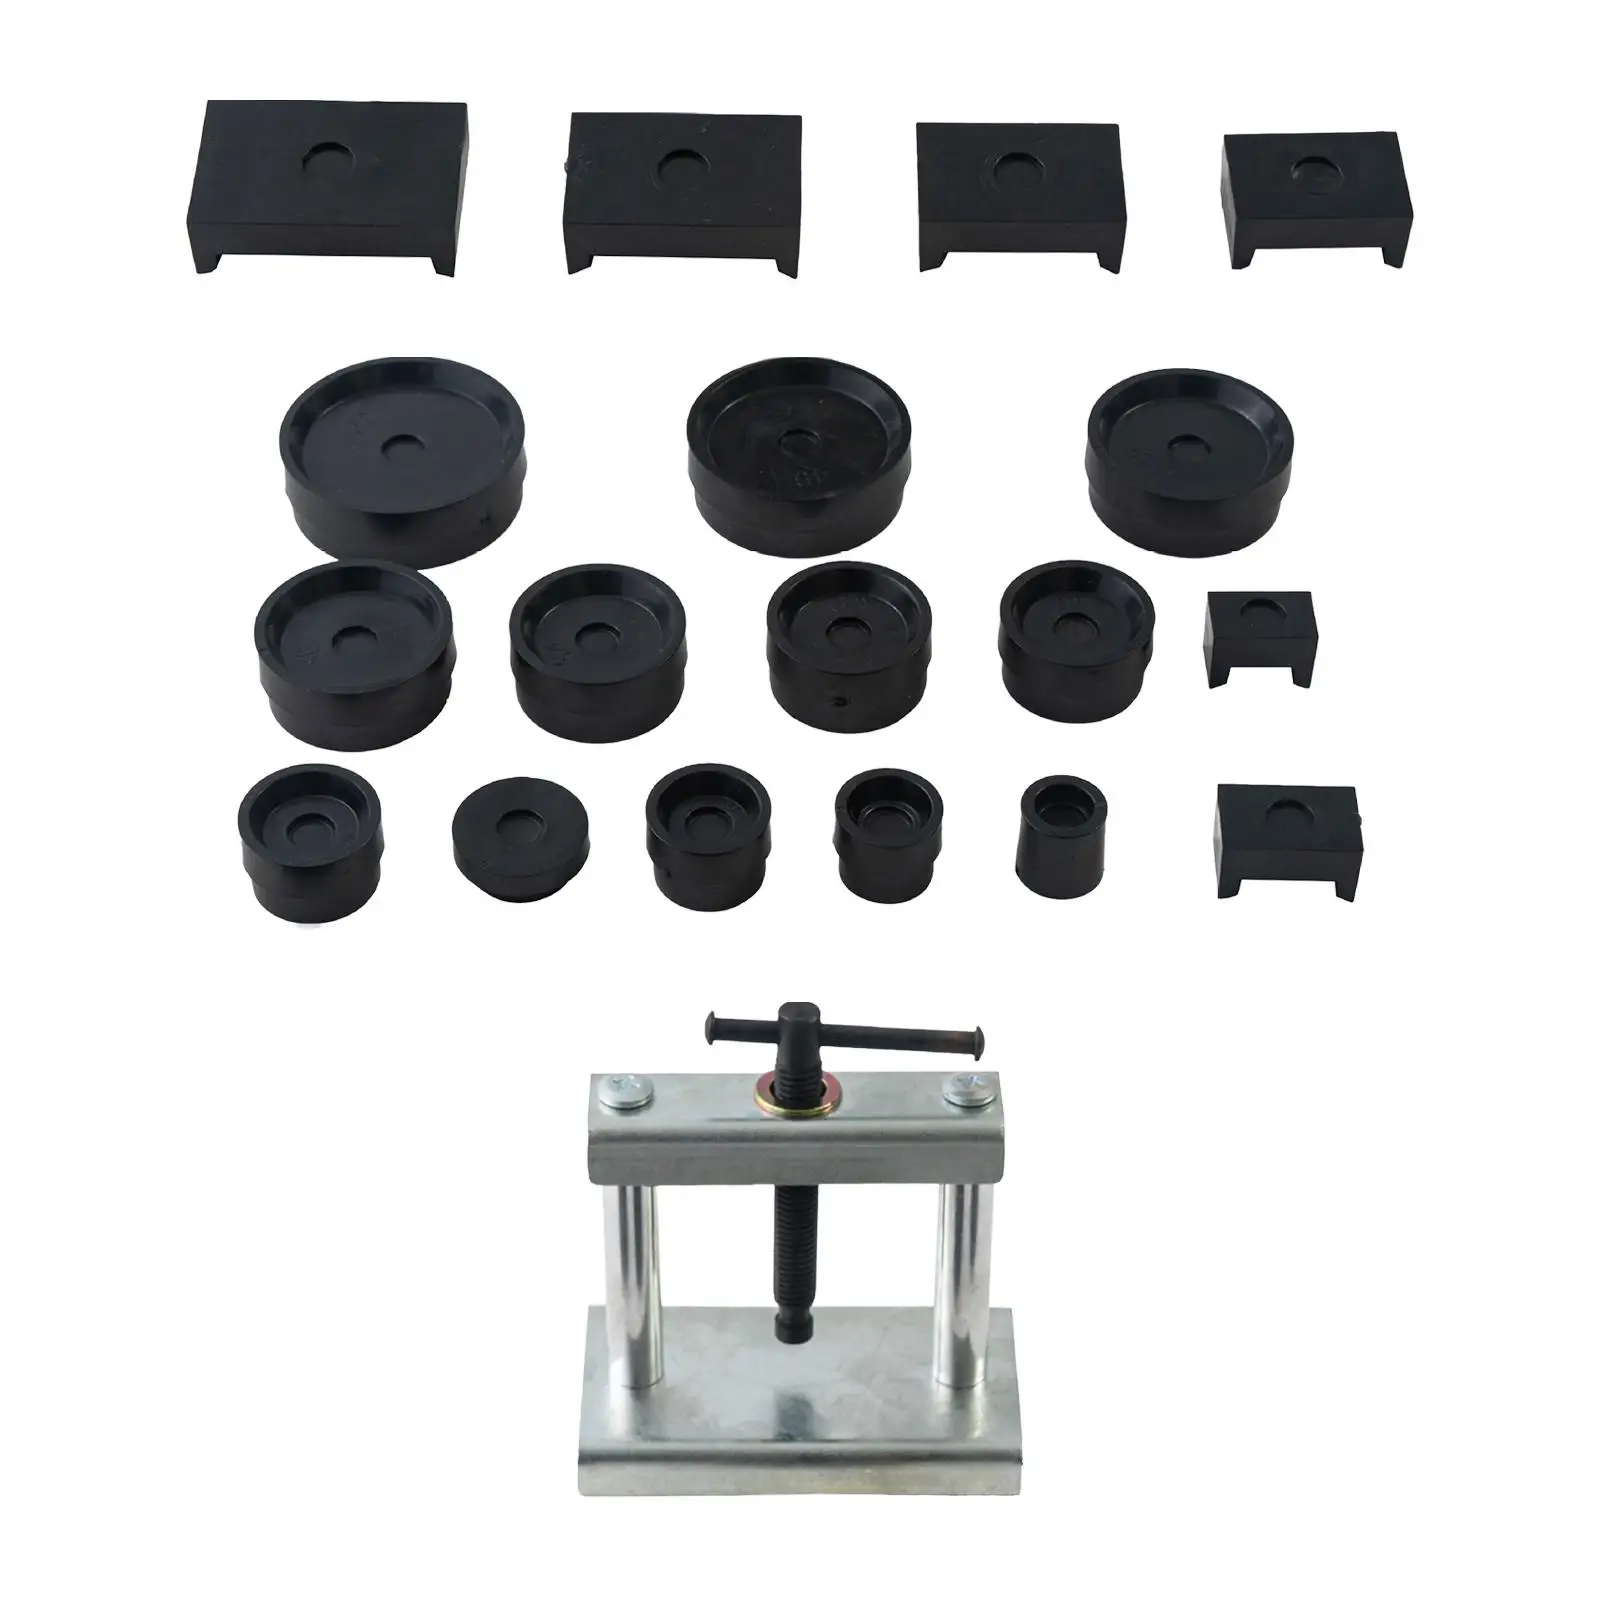 Watch Press Tool Kit with 18Pcs Assorted Dies Bench Tool Closing Watch Back Cover Watch Back Case Closer Watch Repair Kit